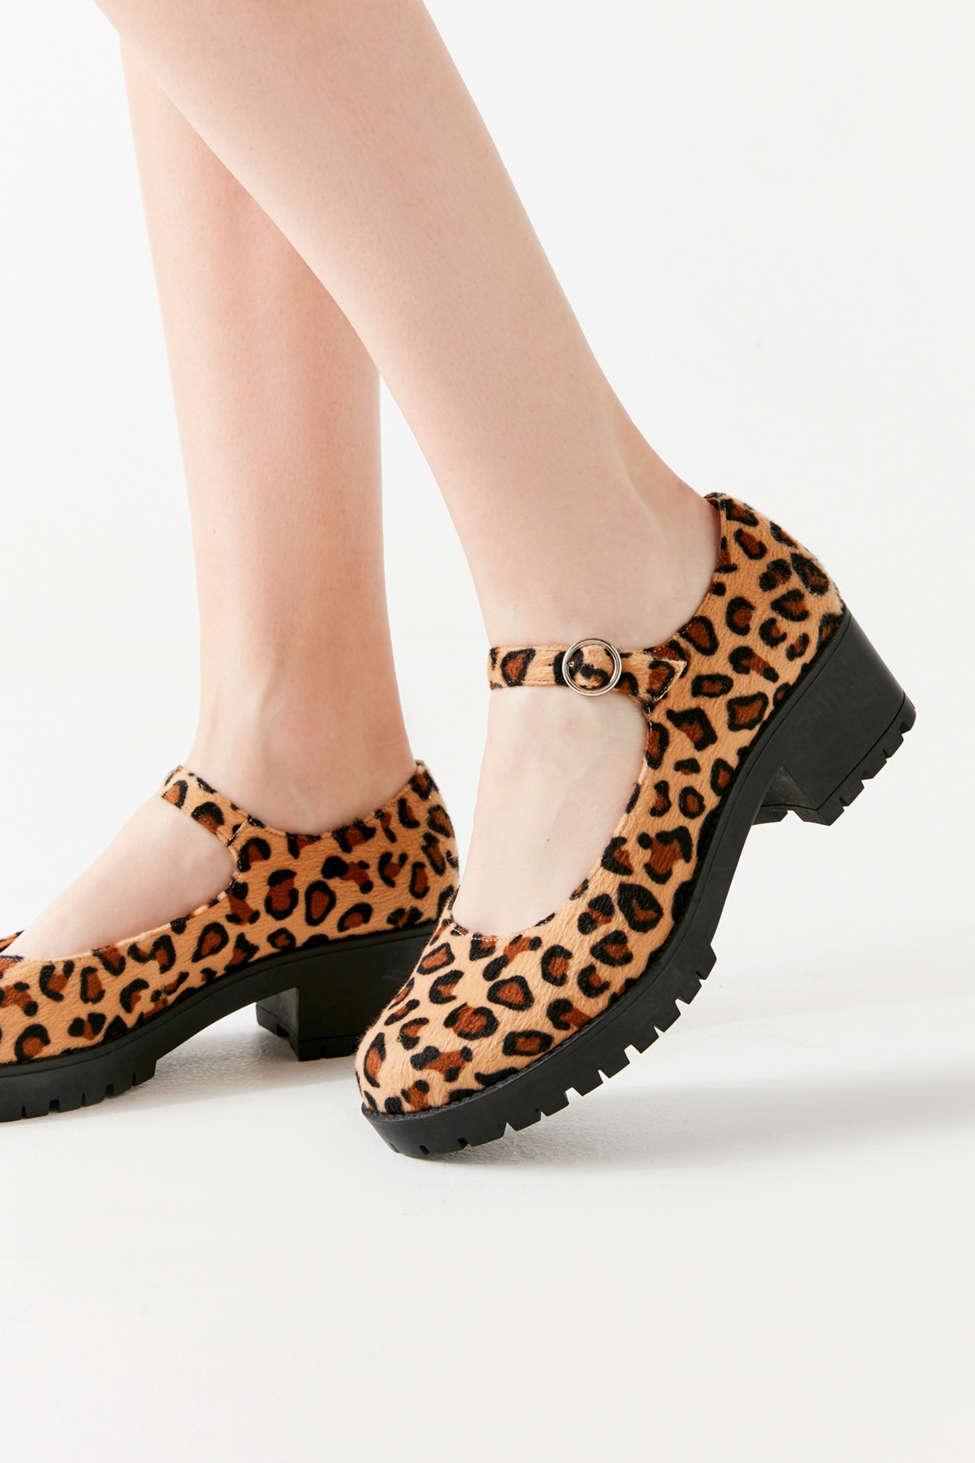 mary jane shoes urban outfitters